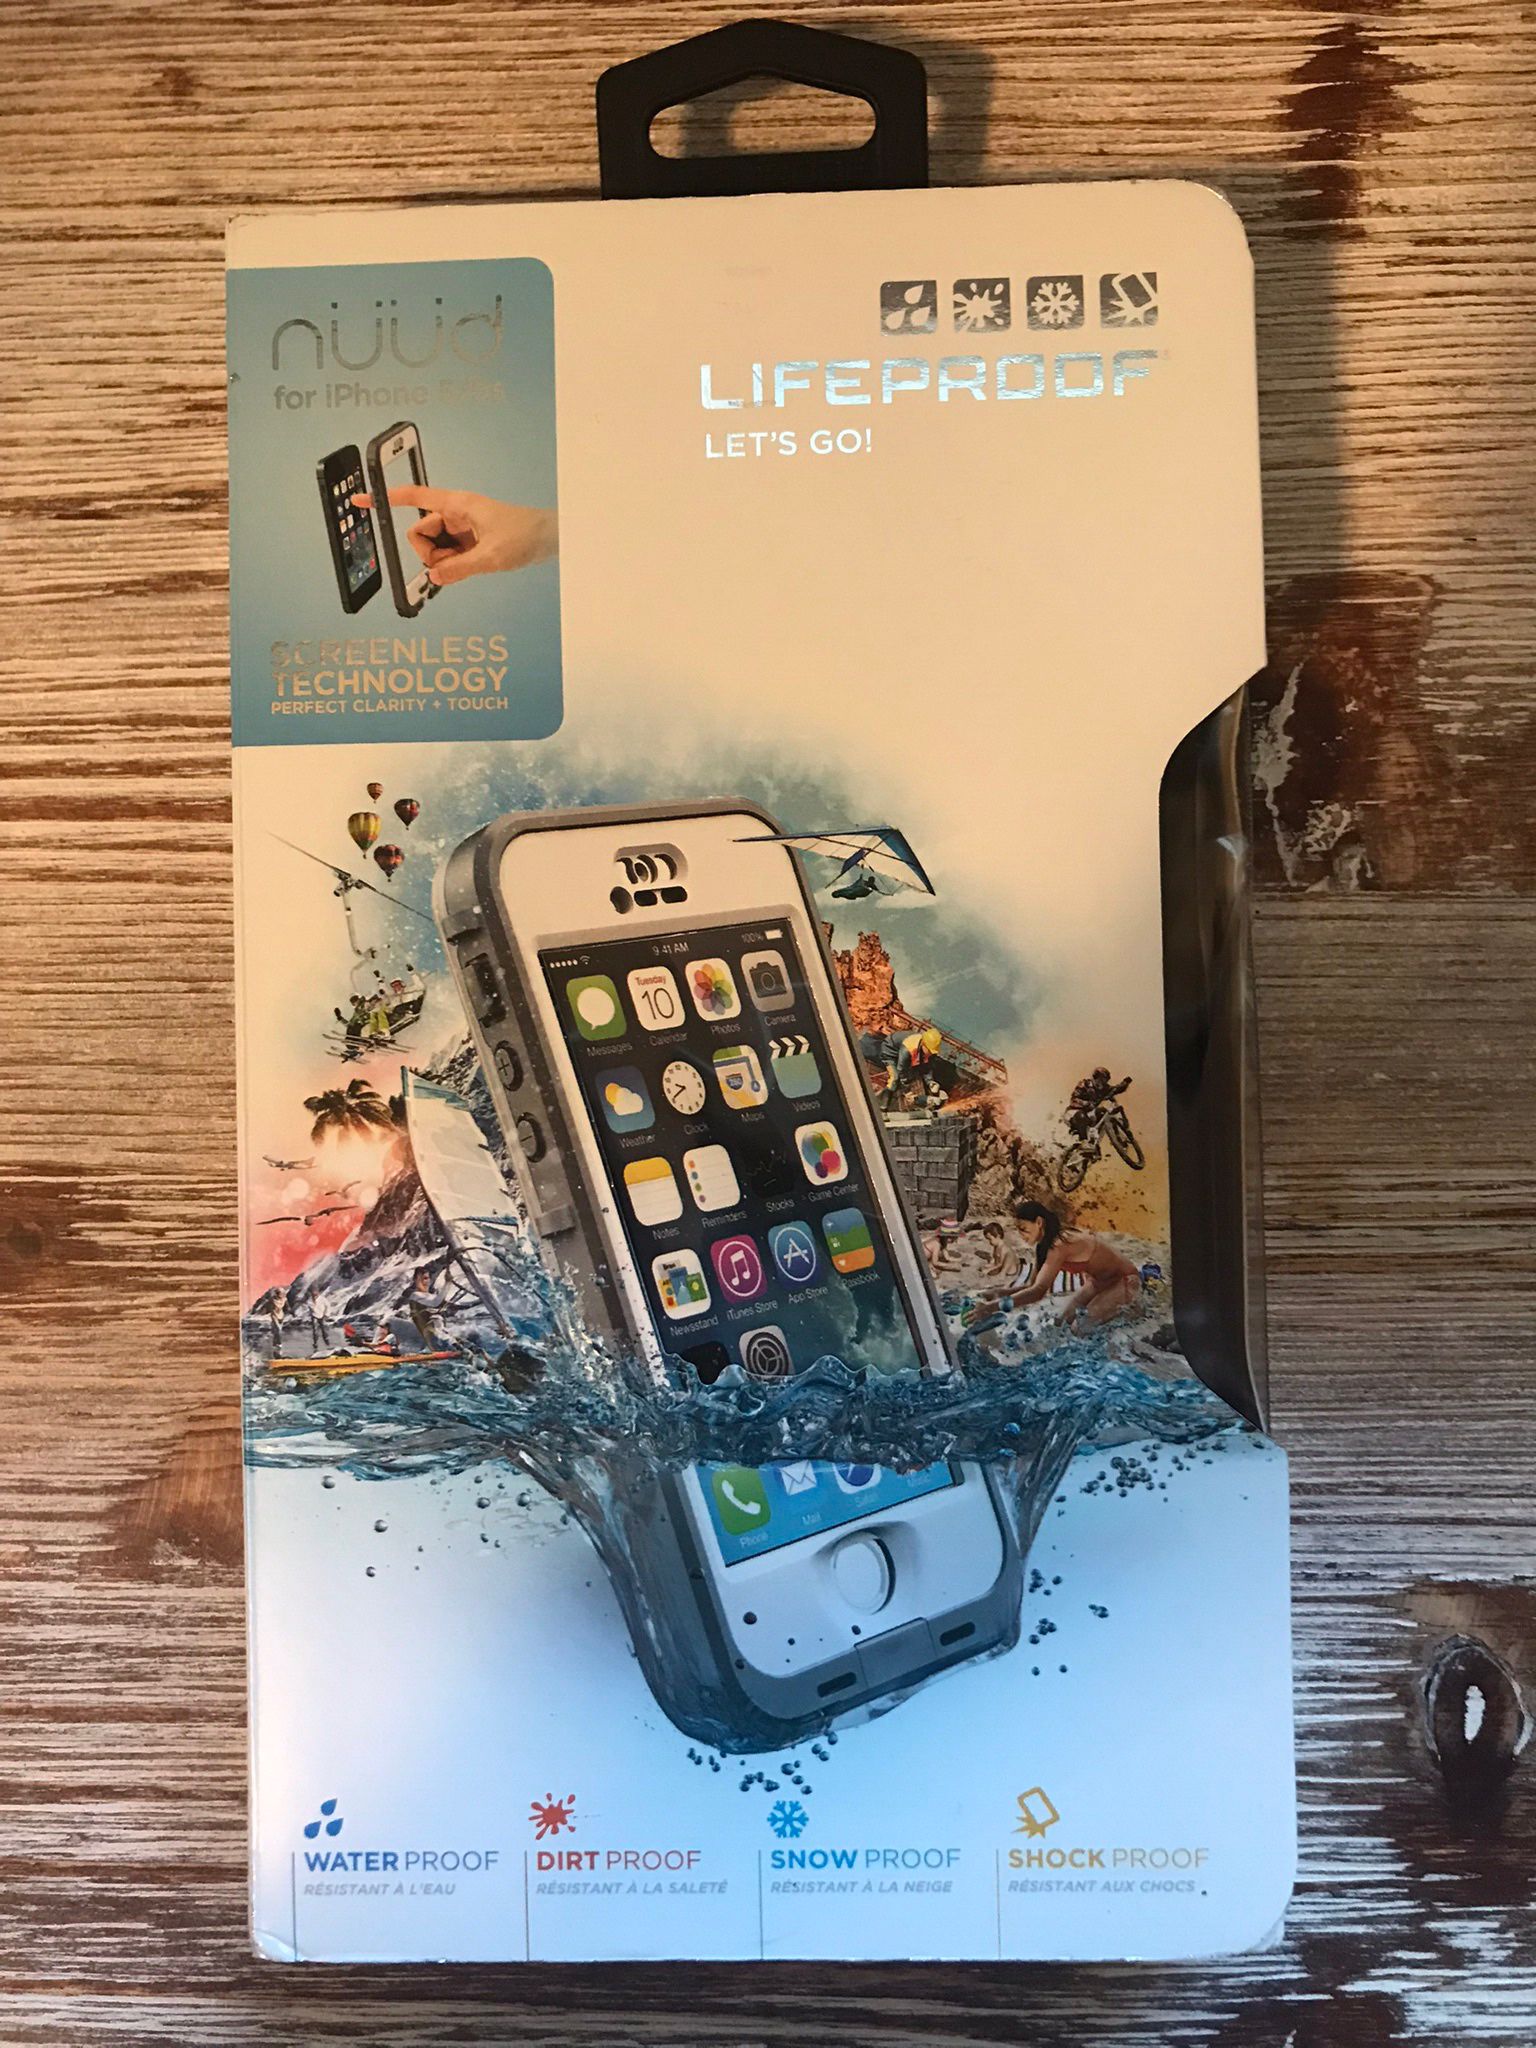 Lifeproof Waterproof Brand New Cell Phone Case for iPhone 5/5s